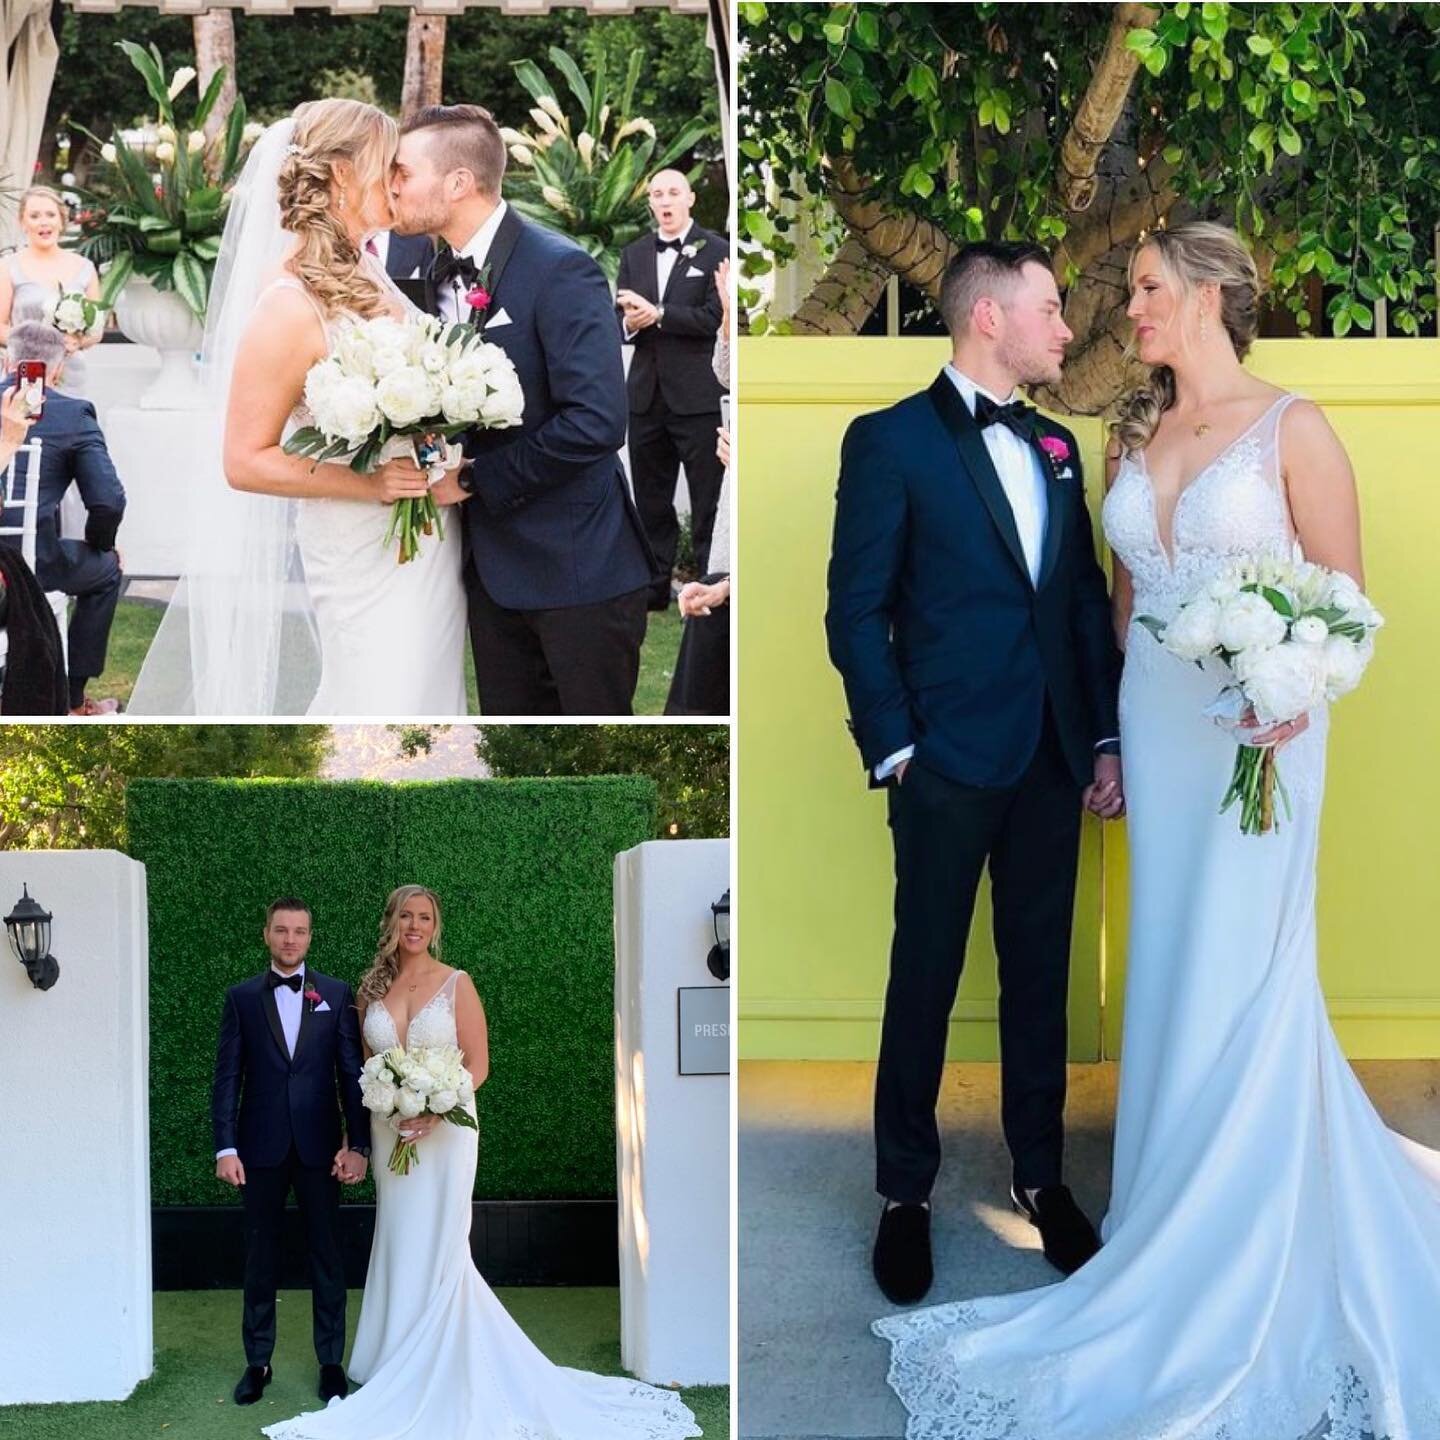 This Couple, their Love, the Venue, and their fabulous Vendors will always be very dear to my heart💛 Happy Belated 1st Year Anniversary to Danielle and Erik!  @avalonhotels @artisaneventfloraldecor @citygirlmarketing @ashleylapradephotography @fergu